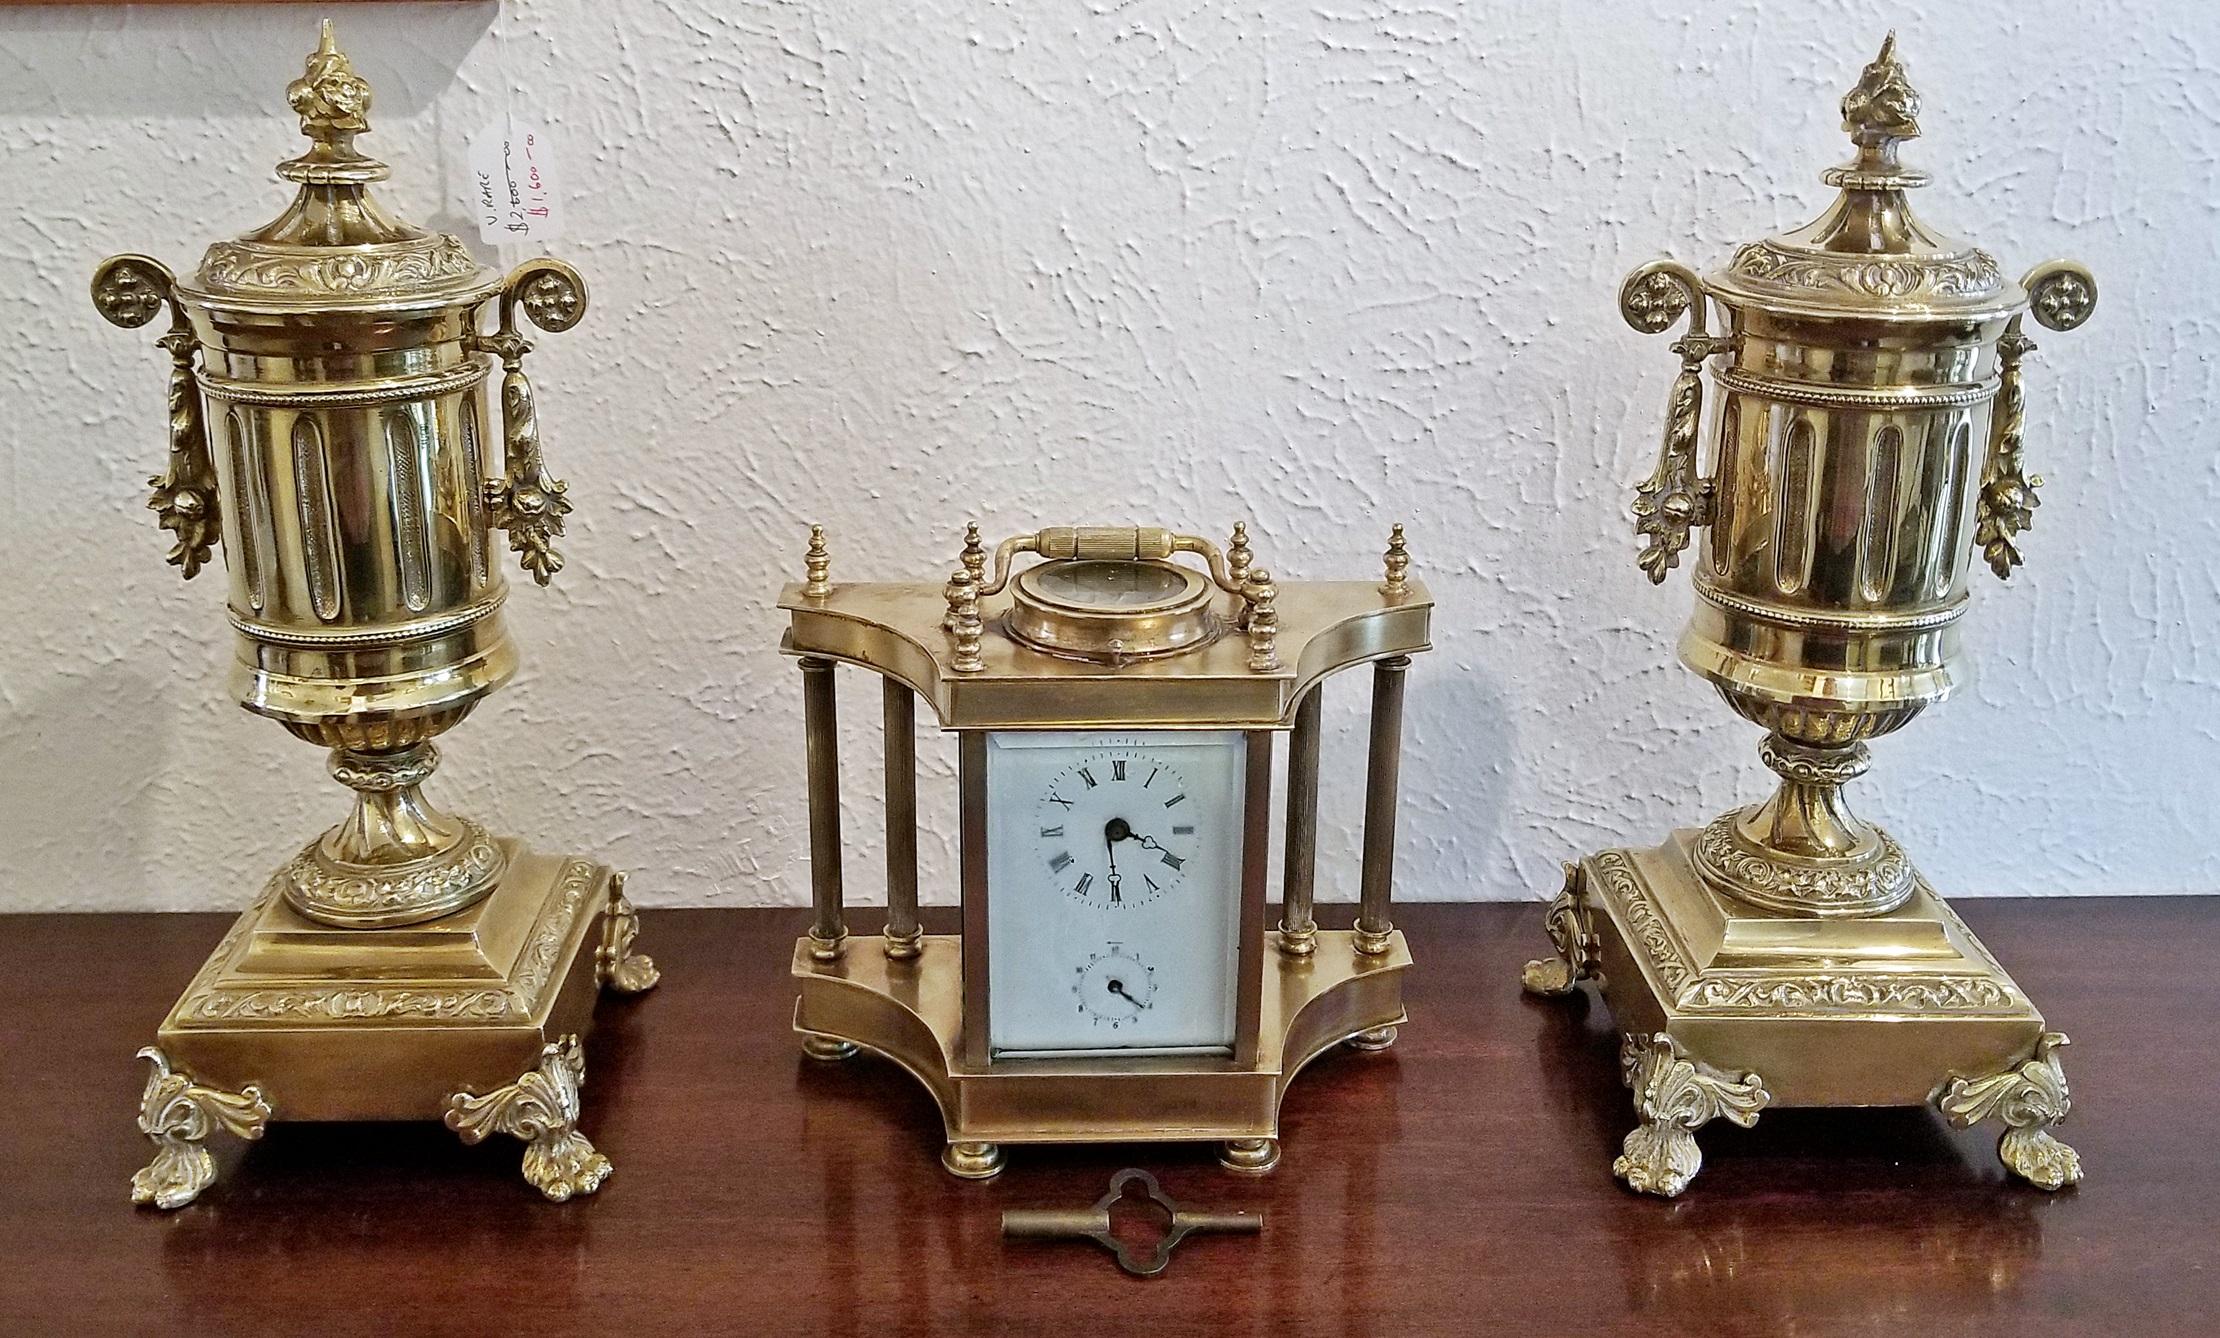 Really nice pair of solid brass garnitures in the shape of urns.

Pointed finial on top, with a fluted and tapered body and side handles leading to a plinth with lions paw supports.

French Empire or neoclassical style.

Perfect accompaniment